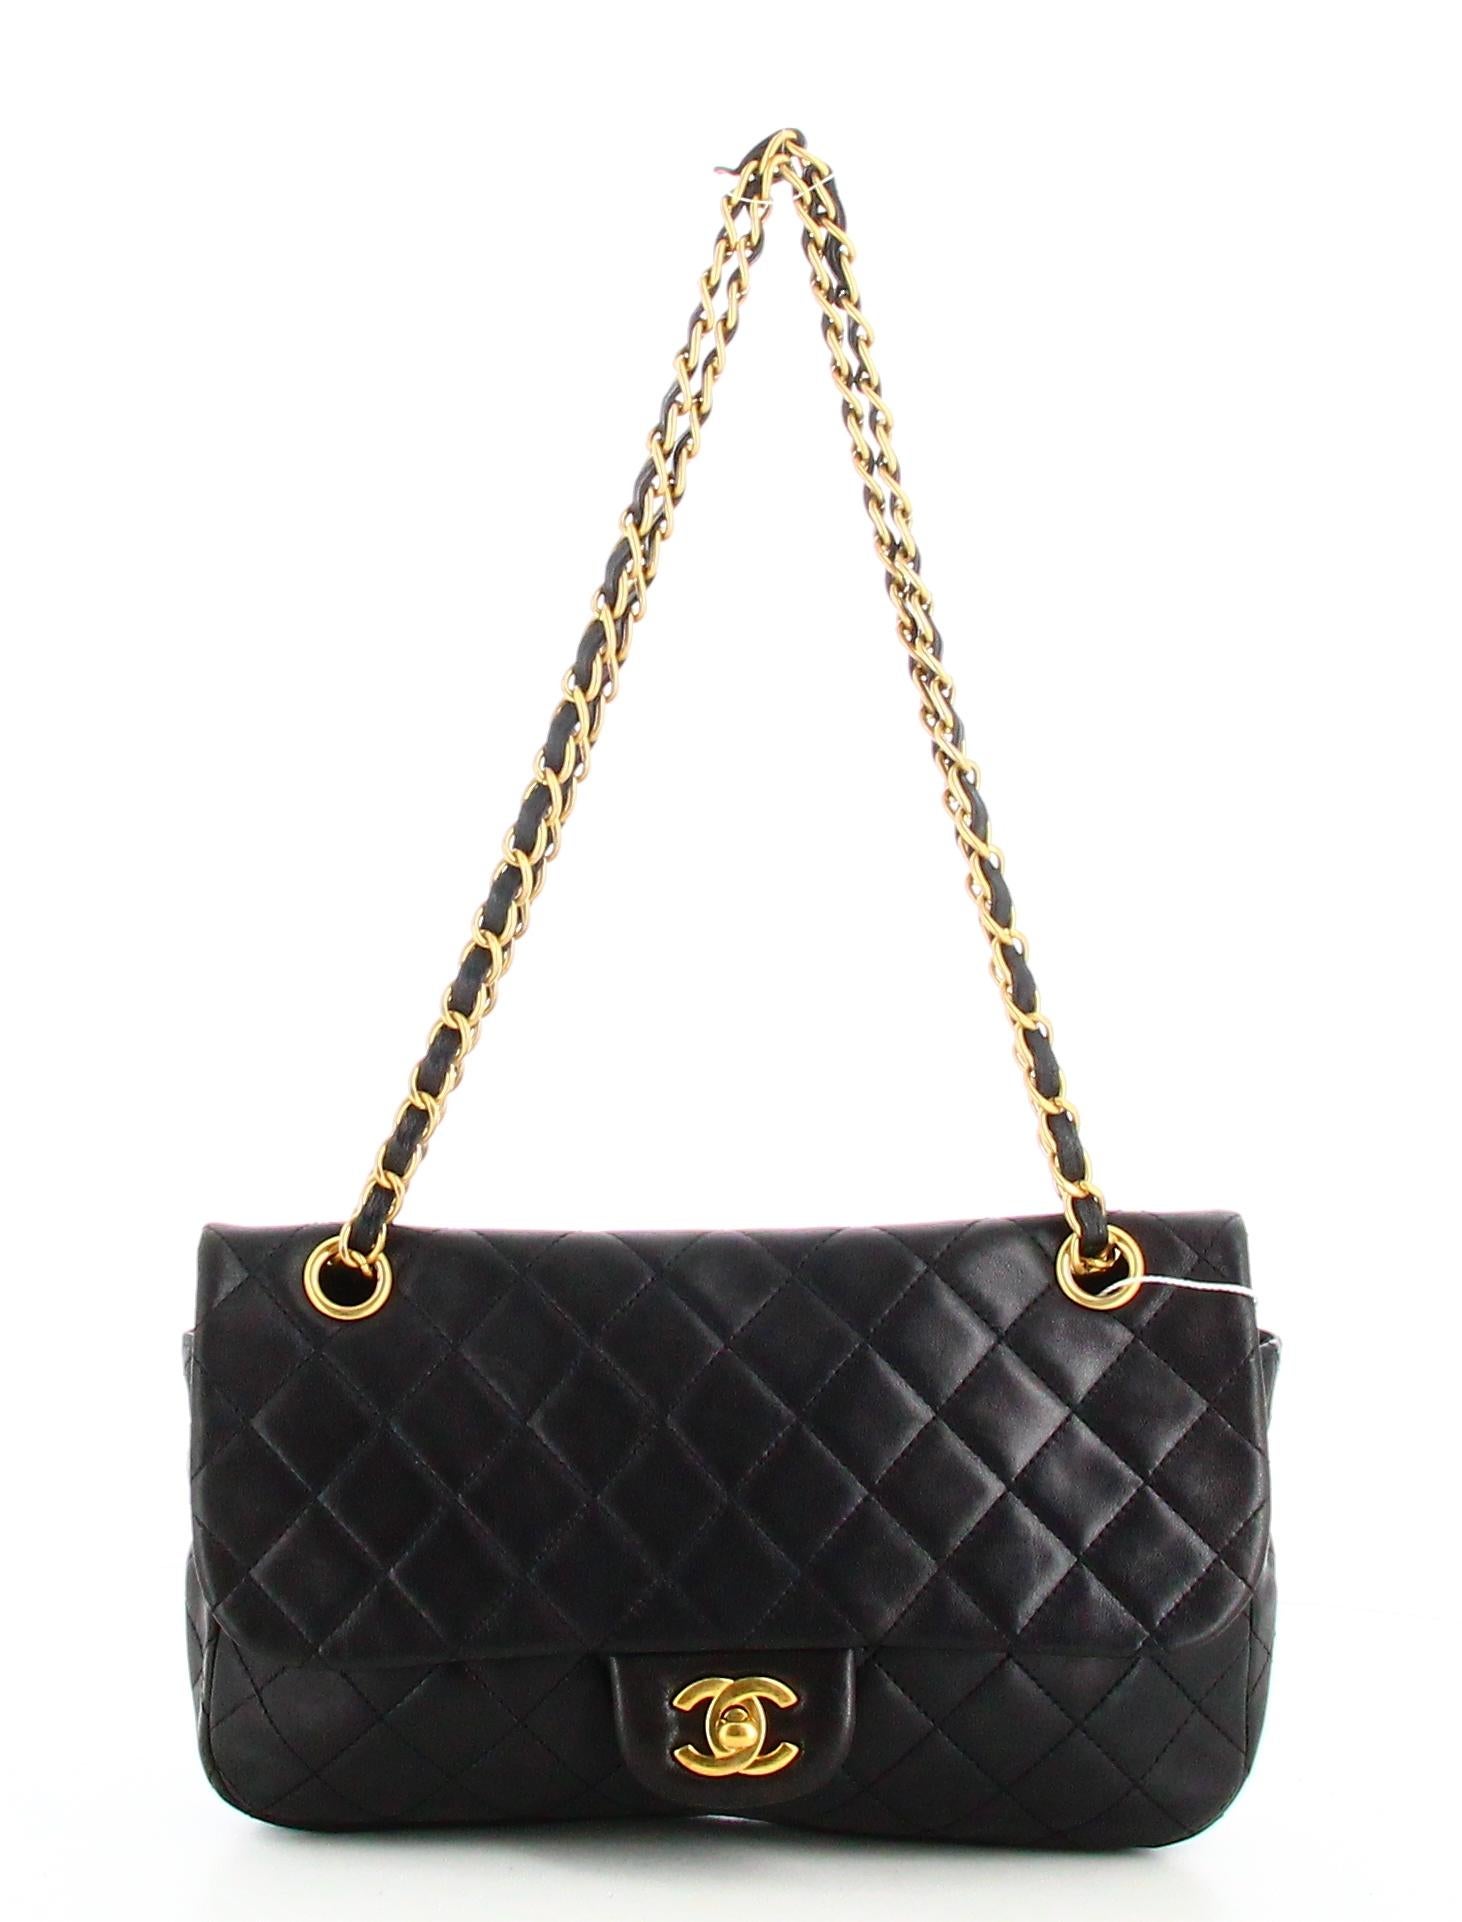 2010 Chanel Medium Classic Lambskin Single Flap Handbag

- Very good condition. Shows very slight signs of wear over time. 
- Chanel Handbag 
- Black quilted leather 
- Golden double chain 
- Clasp: Double C golden 
- Interior: Black leather plus